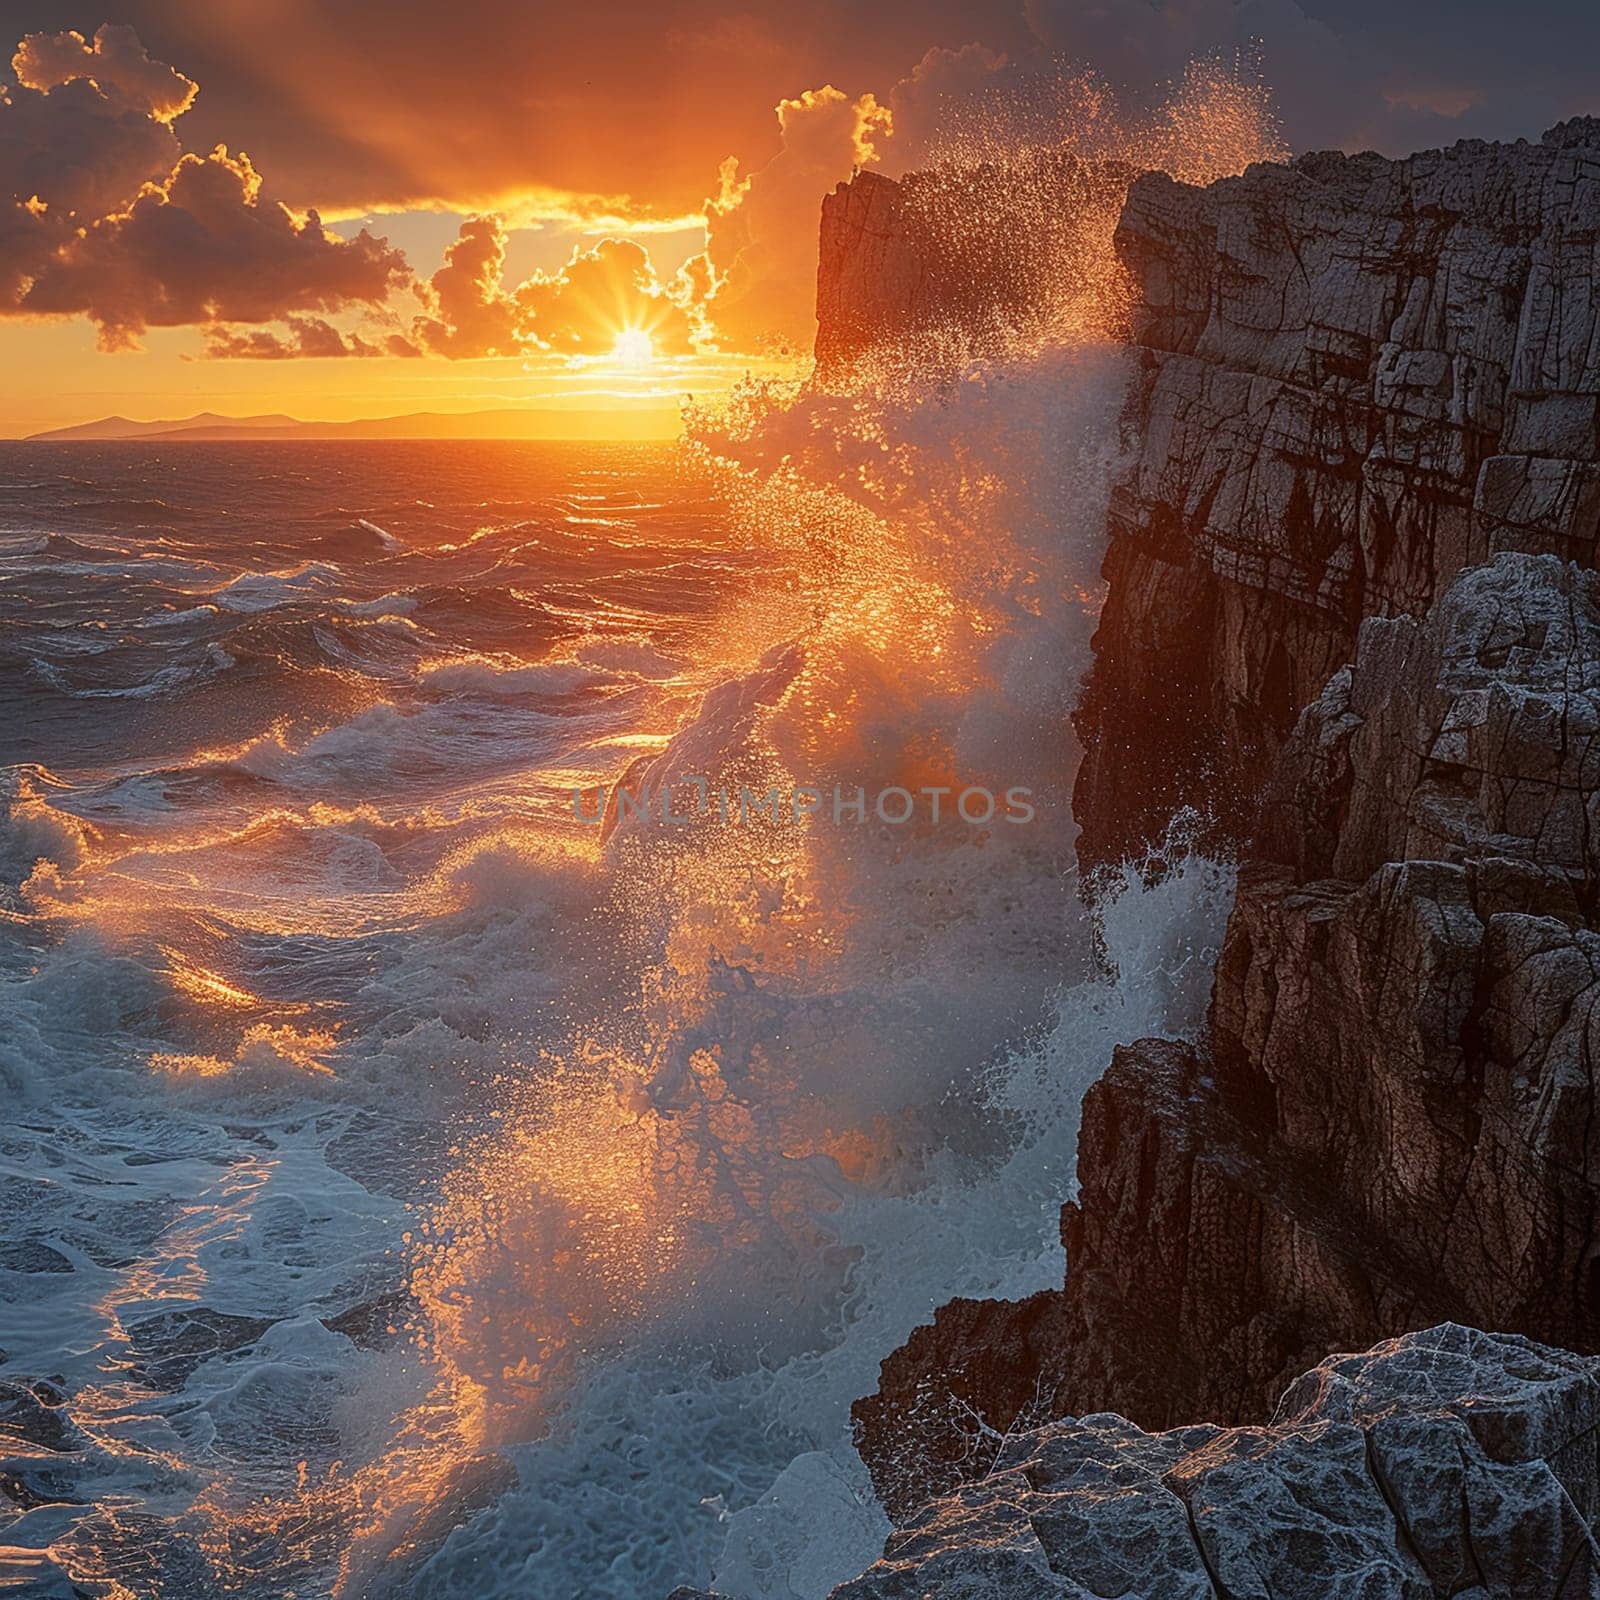 Crashing Waves Against a Rocky Cliff at Sunset, The water blurs into spray, the ocean's relentless charge.